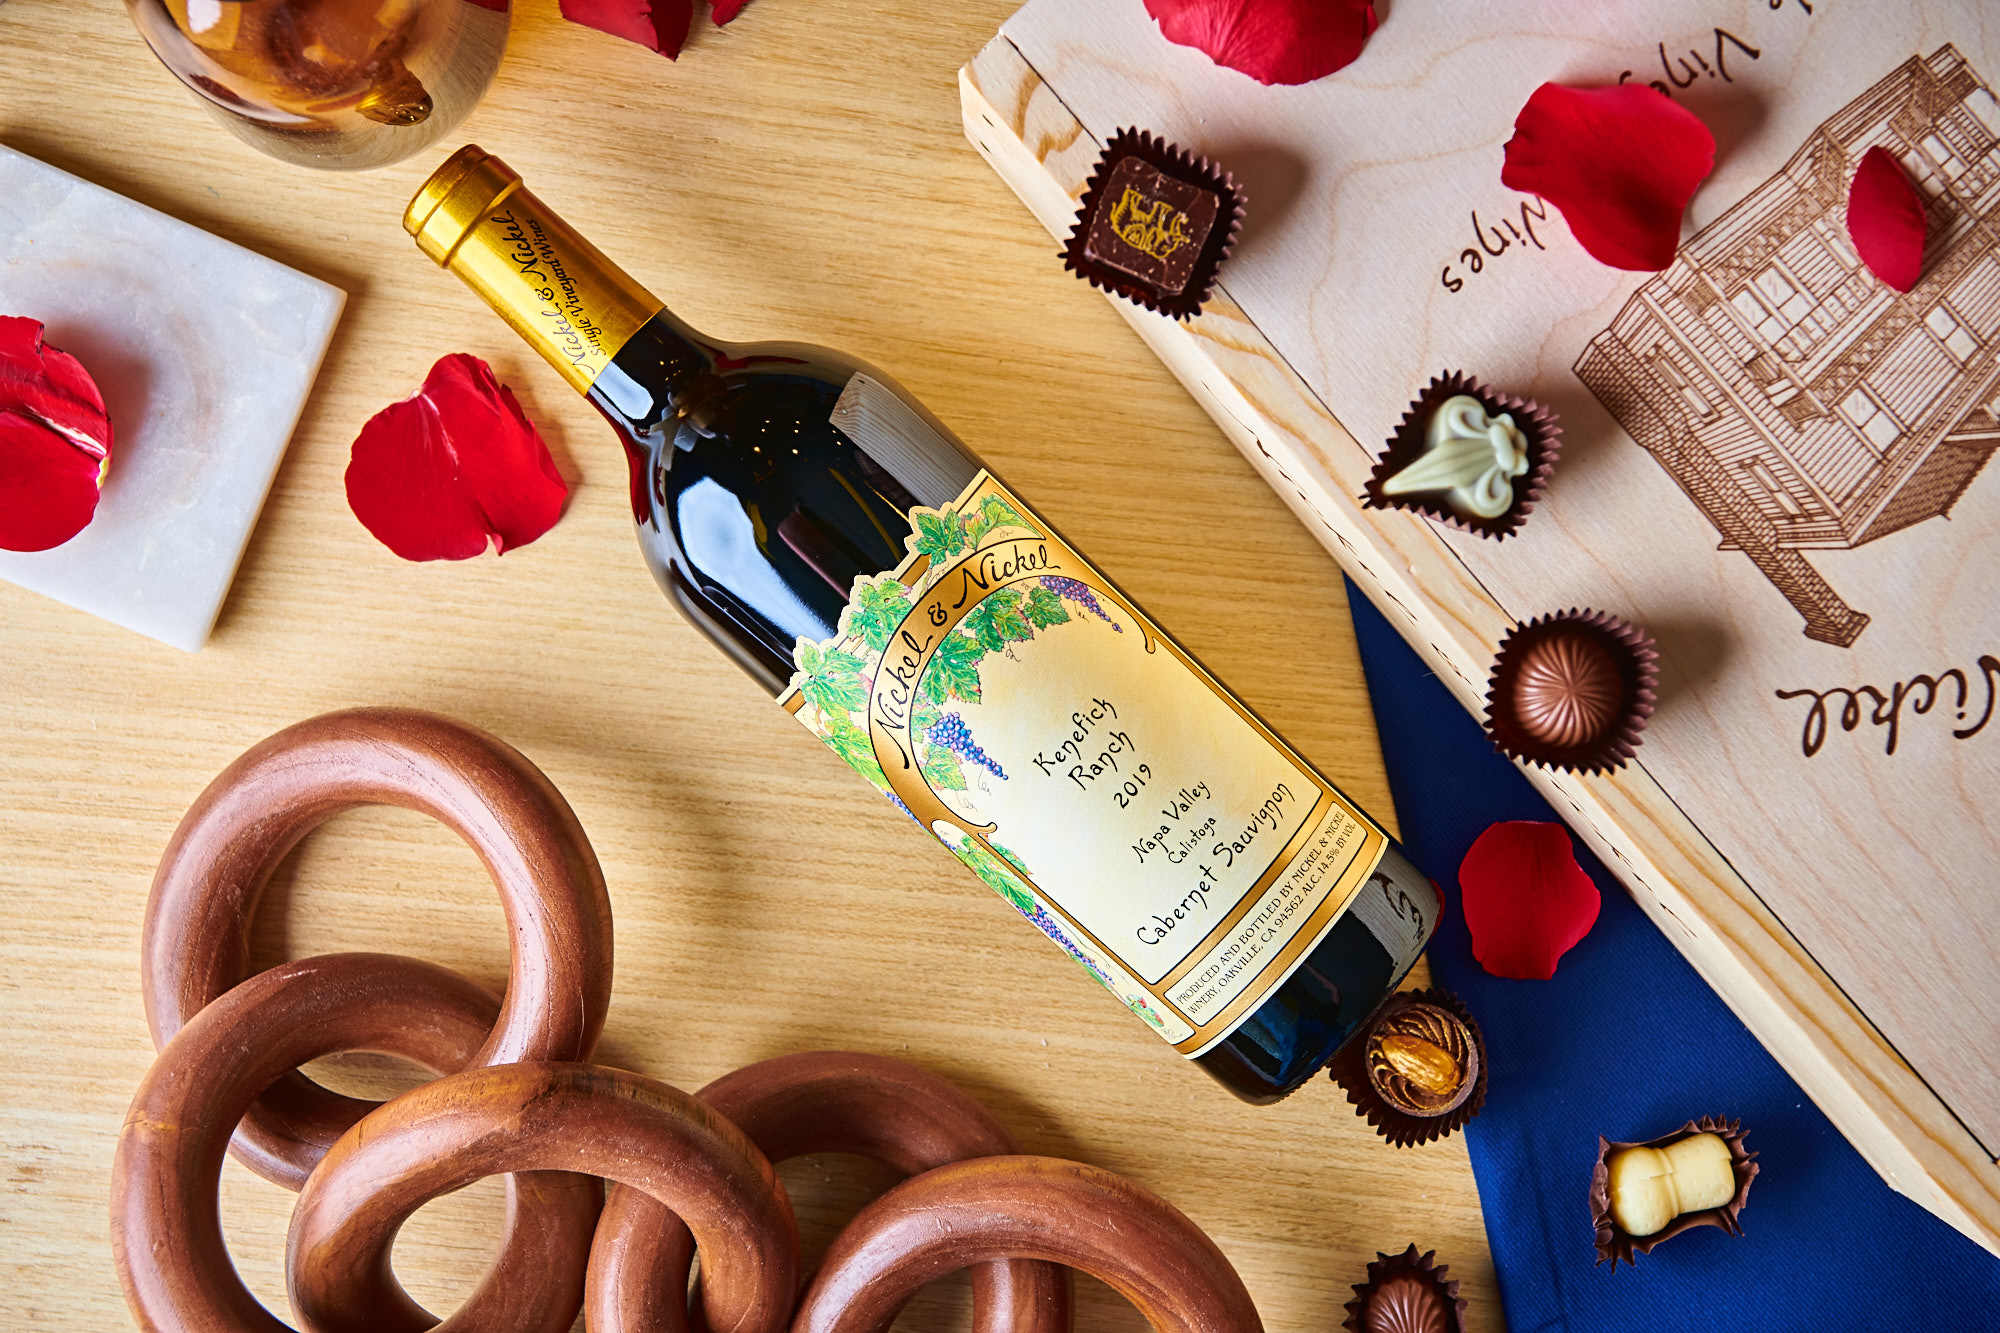 Kenefick Ranch Cabernet and Chocolate Gift